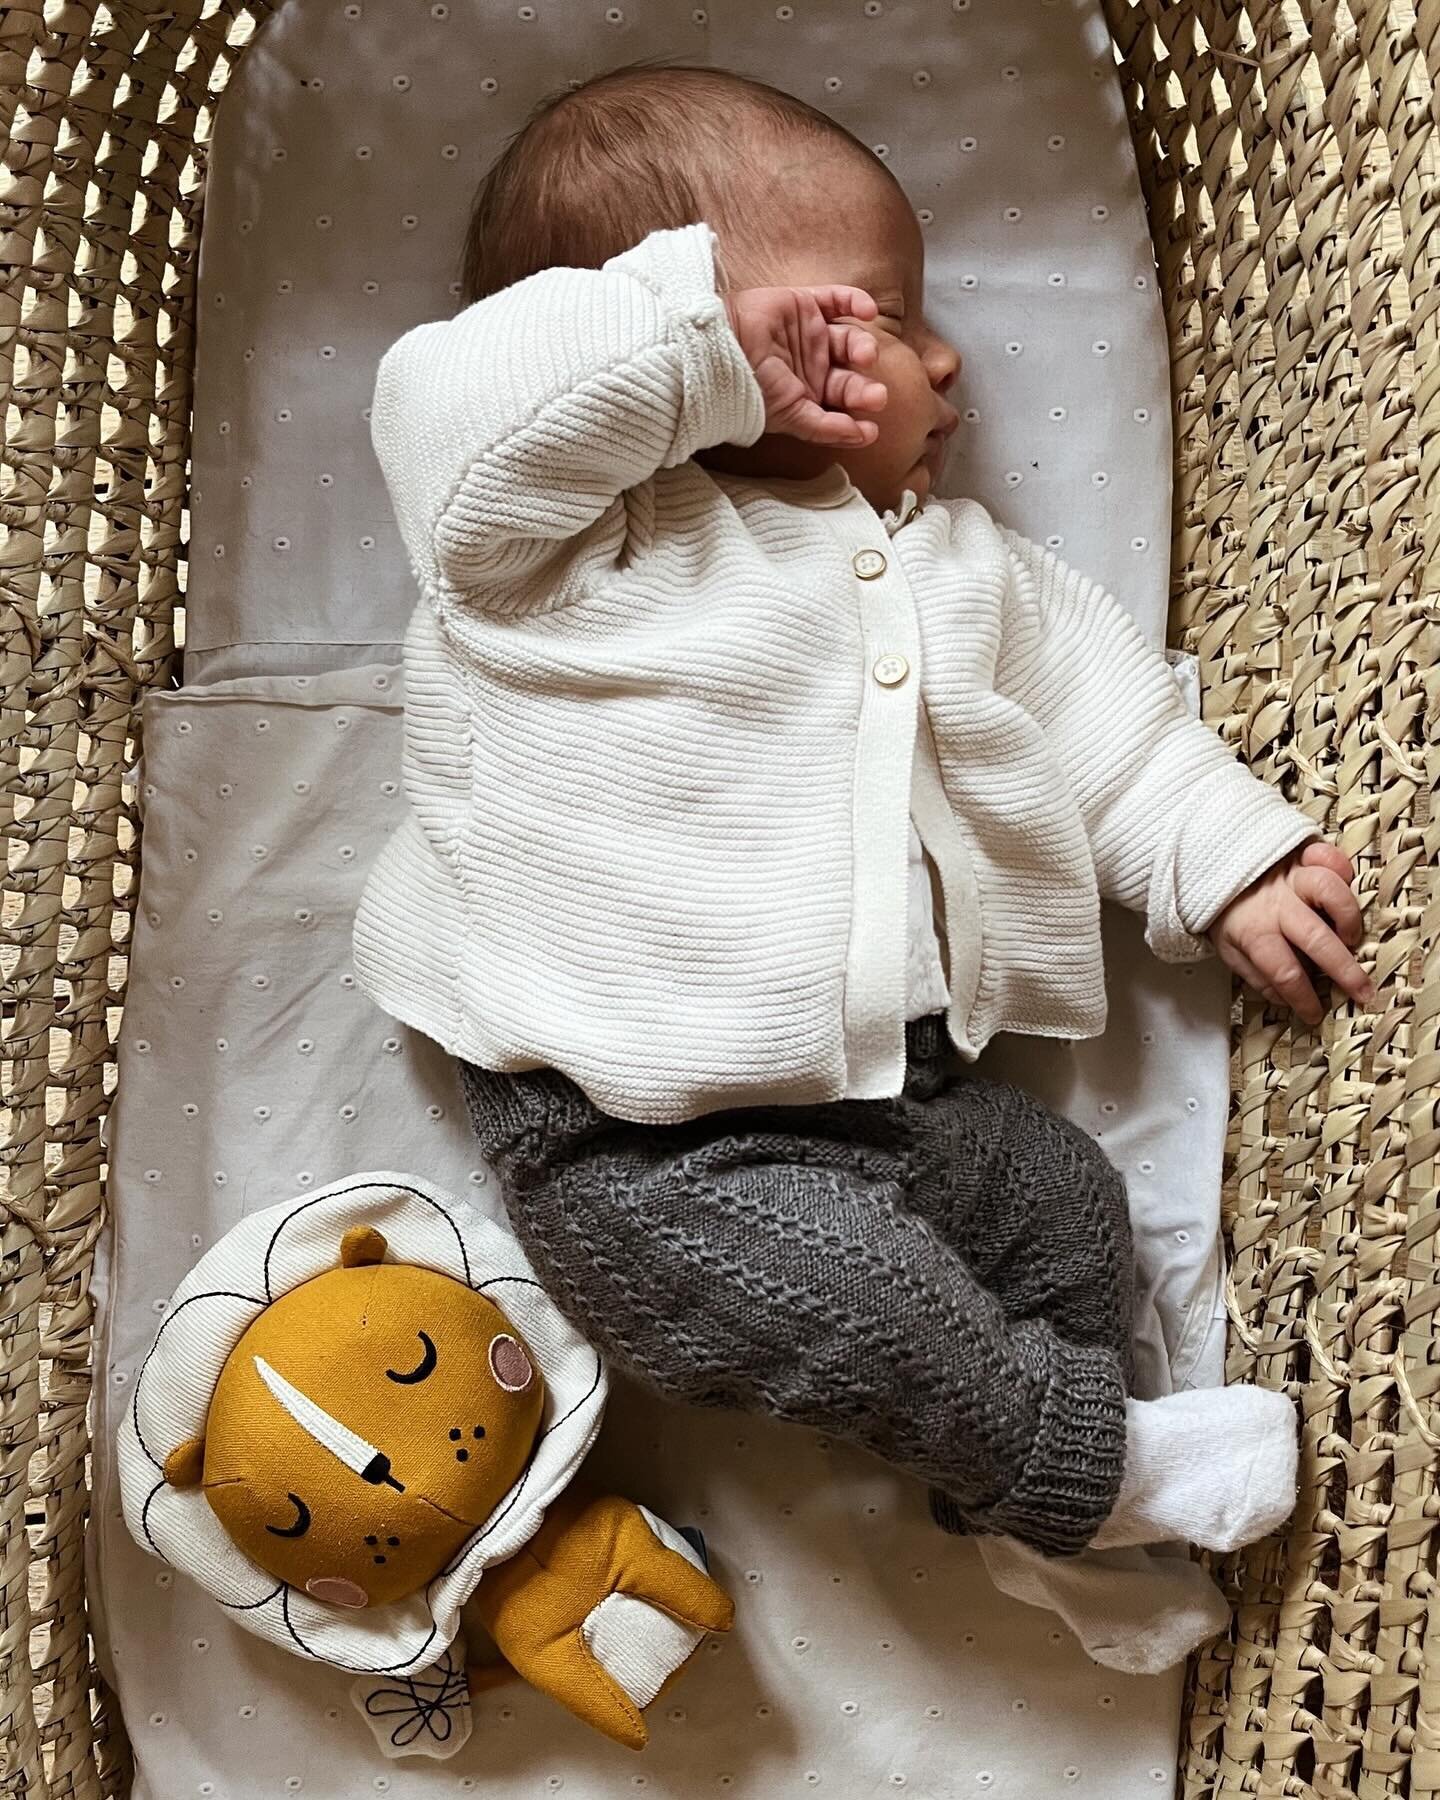 Weekend vibes 😴😴😴 snoozing away in his newborn knit pants 🫠
They are handmade in Belgium 🇧🇪 from 100% deadstock wool. Due to the foldable cuffs these pants grow along with your baby and fit a bit longer than average. If you feel like ordering y